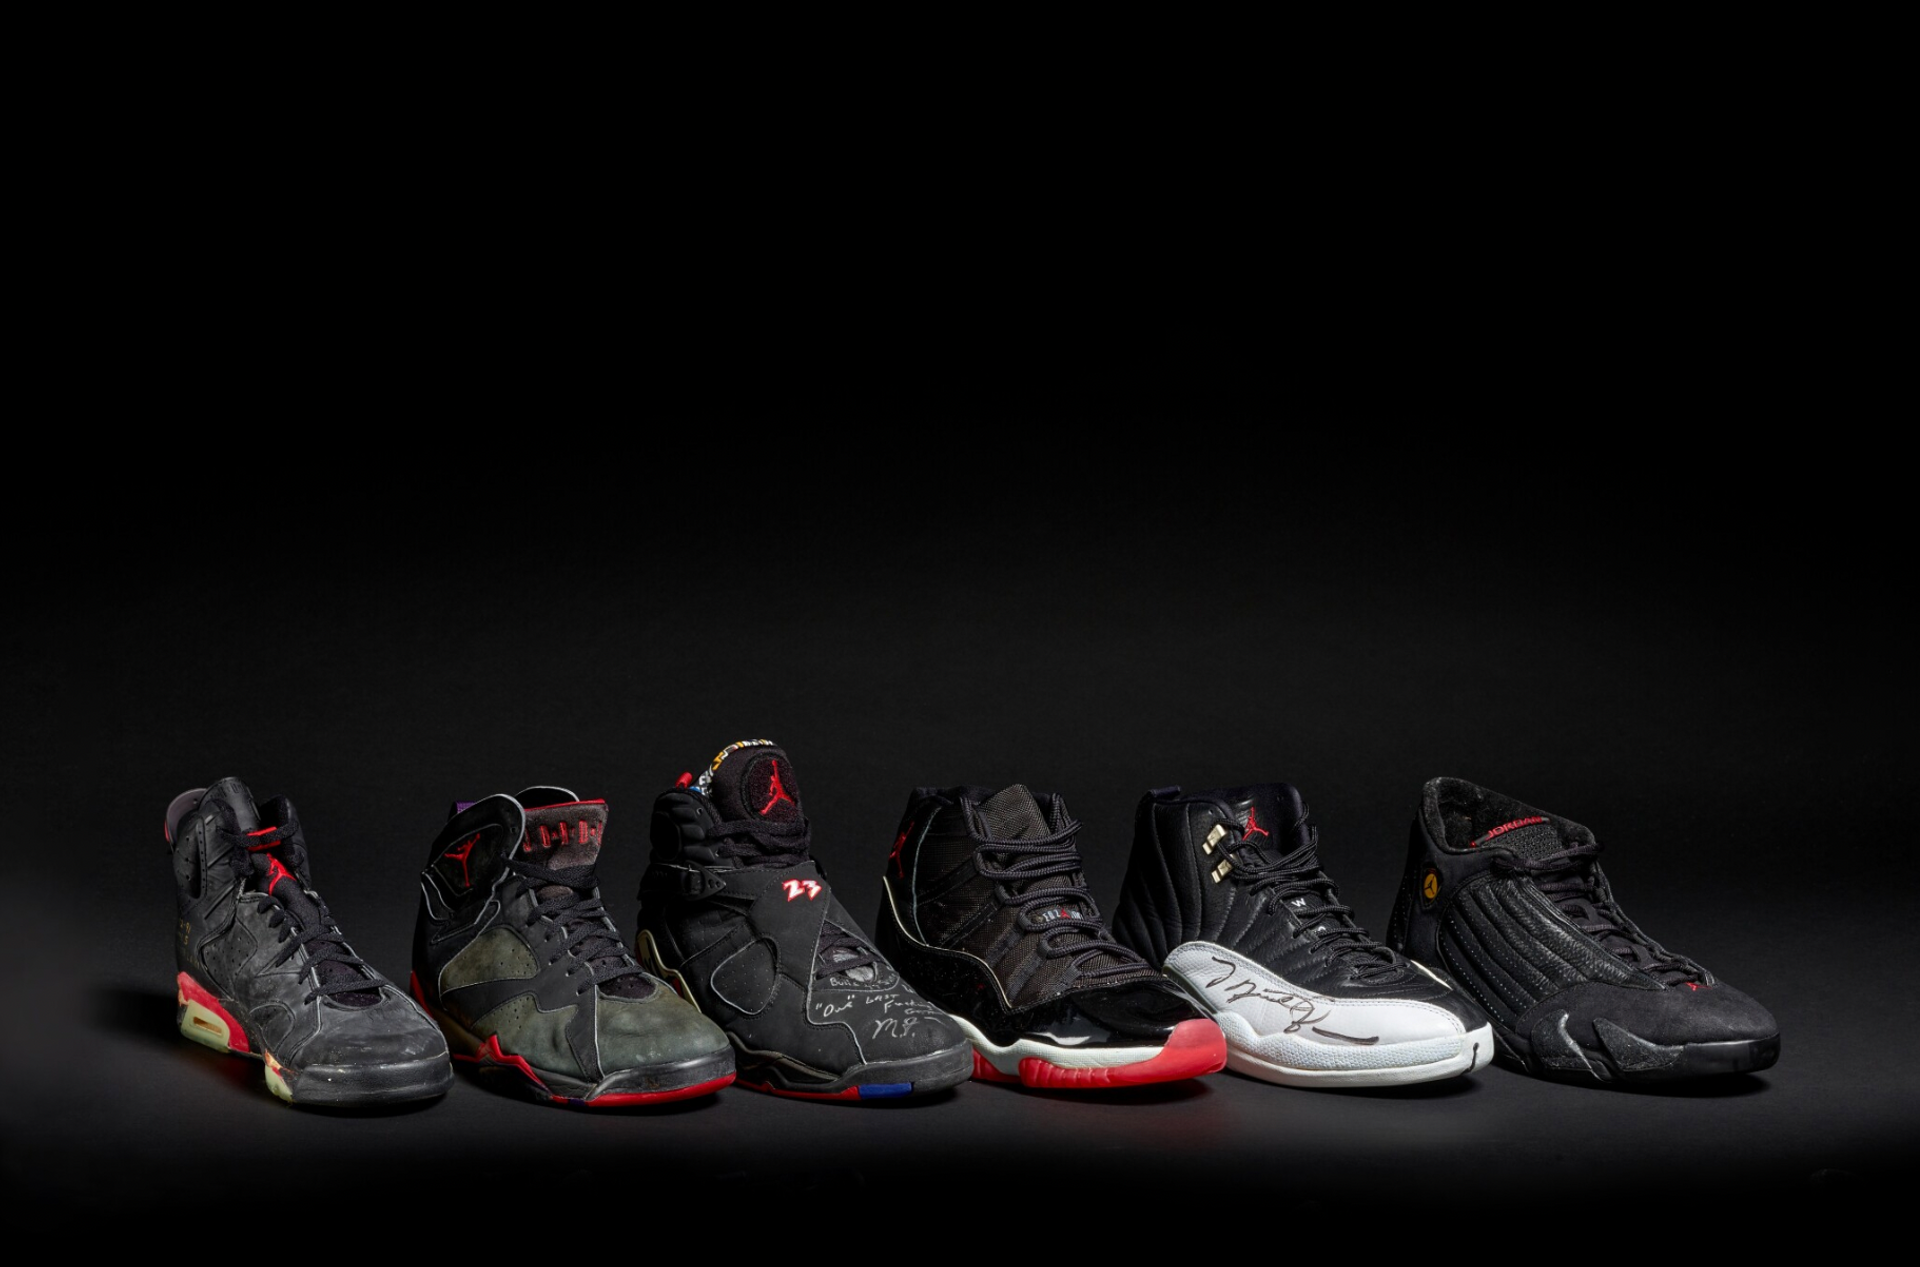 A photograph of six Michael B Jordan sneakers lined up, set against a black studio background with dramatic lighting on the shoes